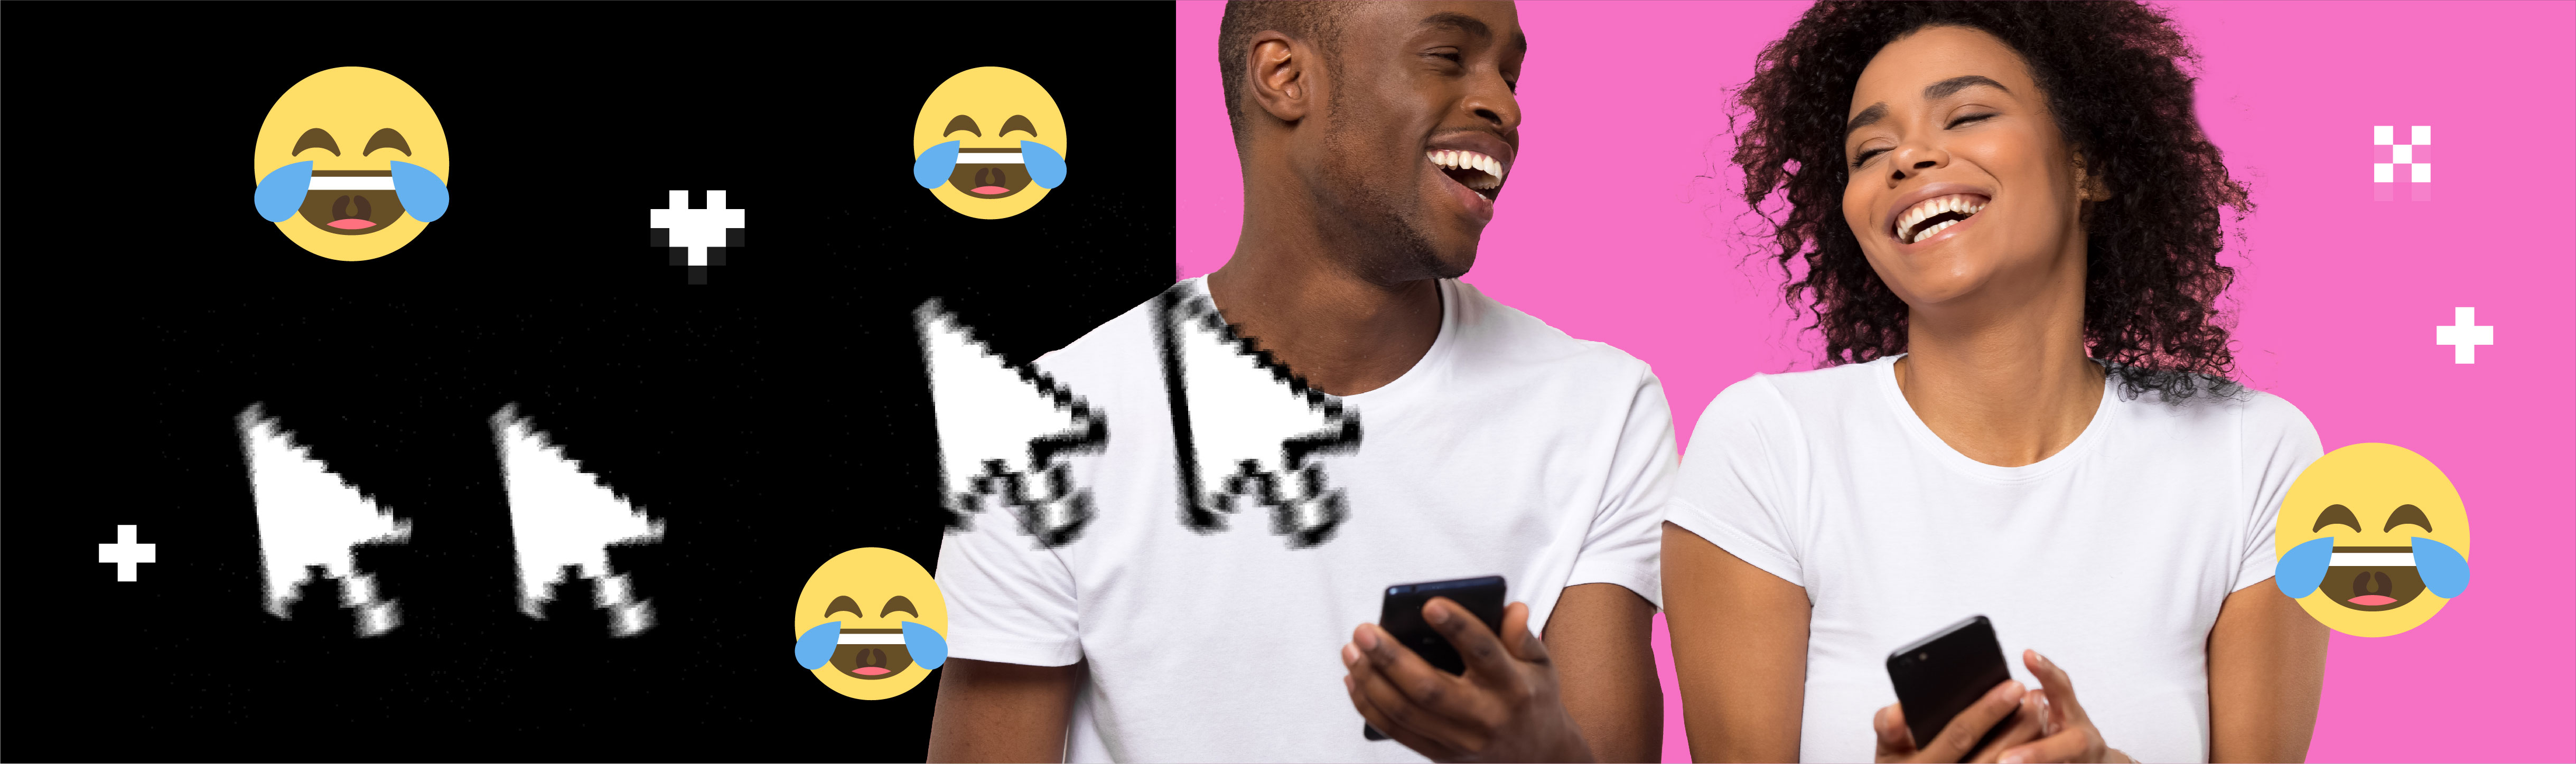 "two people holding phones and laughing, with laughing emojis and cursor arrows"